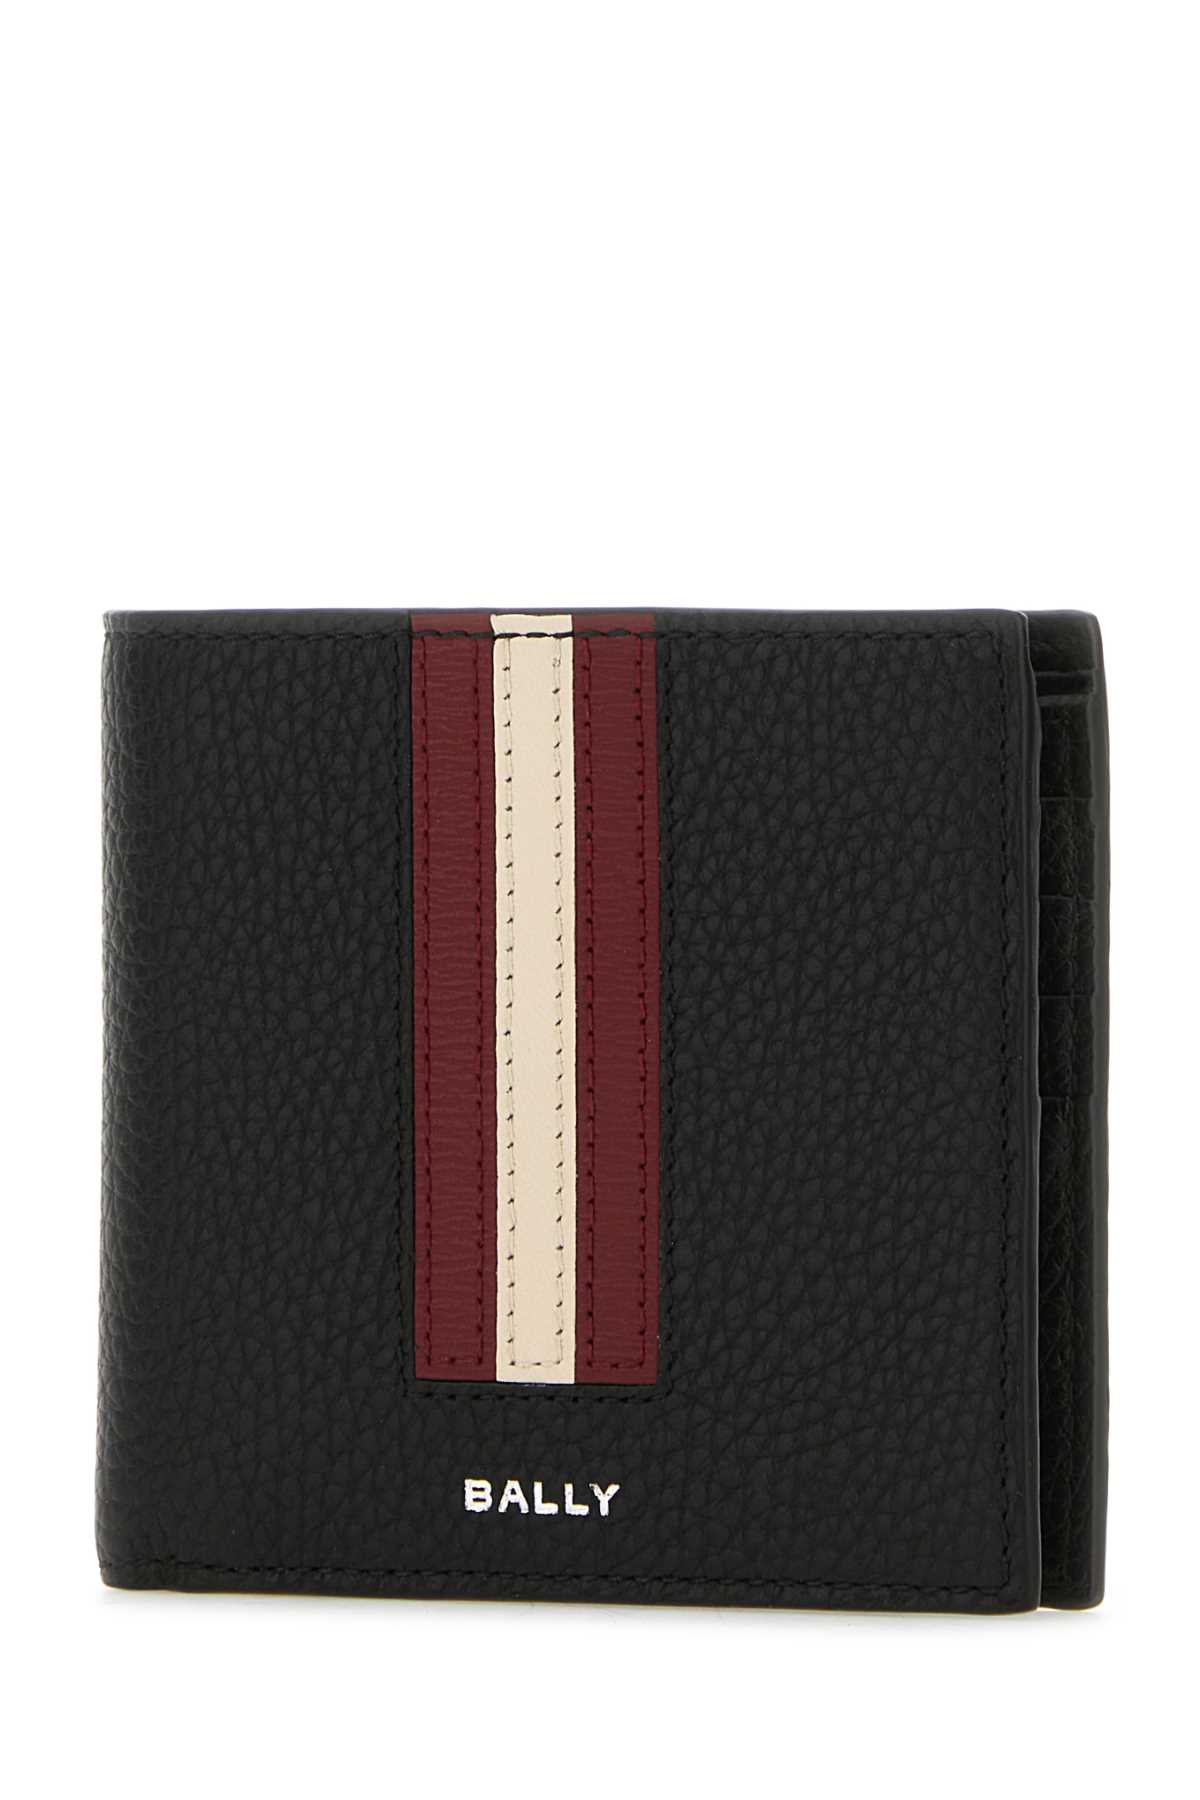 Bally Black Leather Wallet In Blackredpall